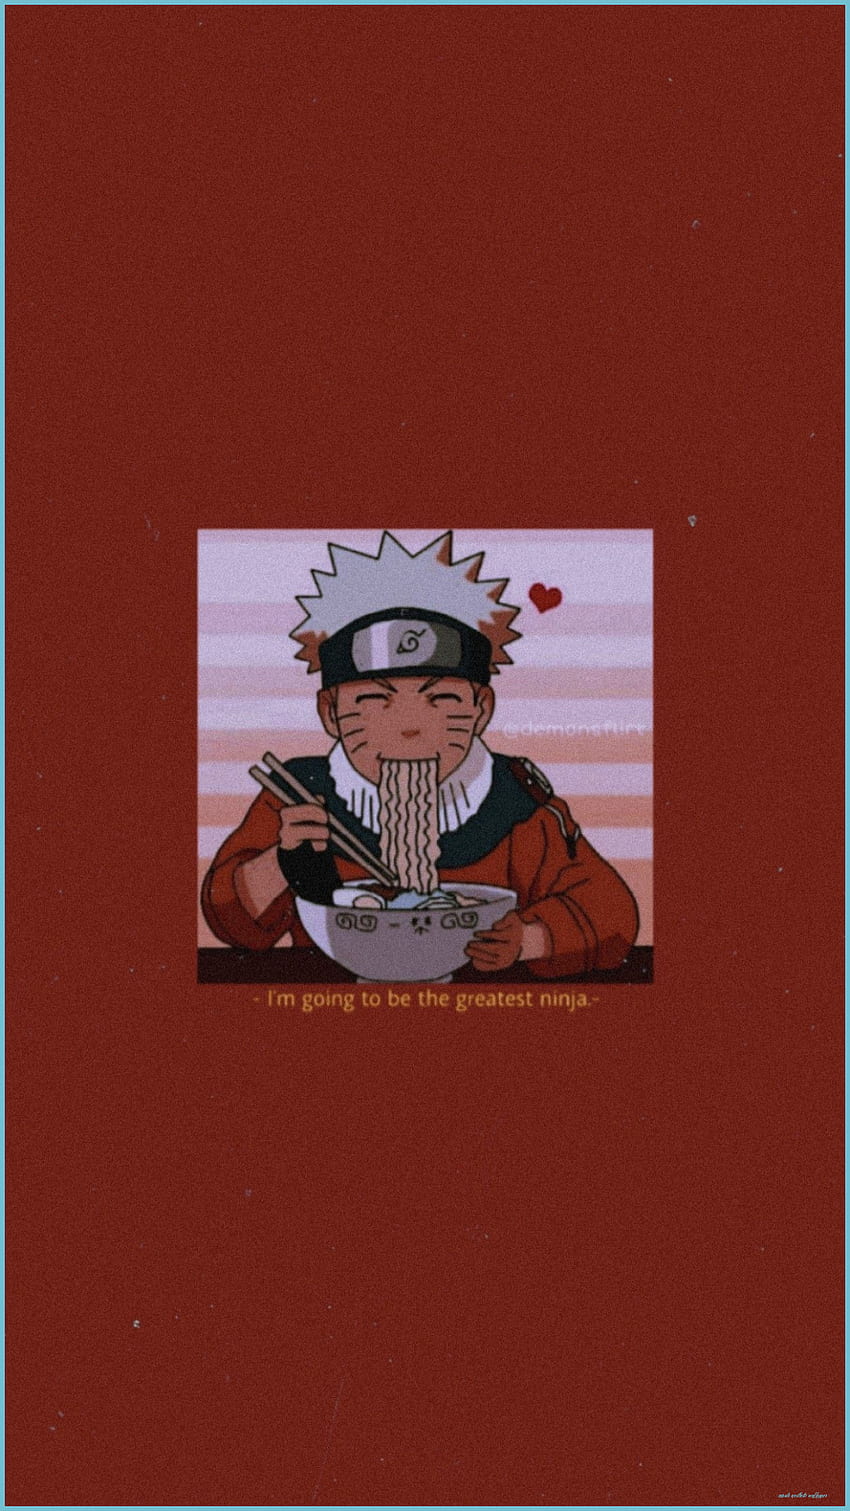 Naruto phone wallpaper aesthetic red i'm going to be the greatest ninja - Naruto